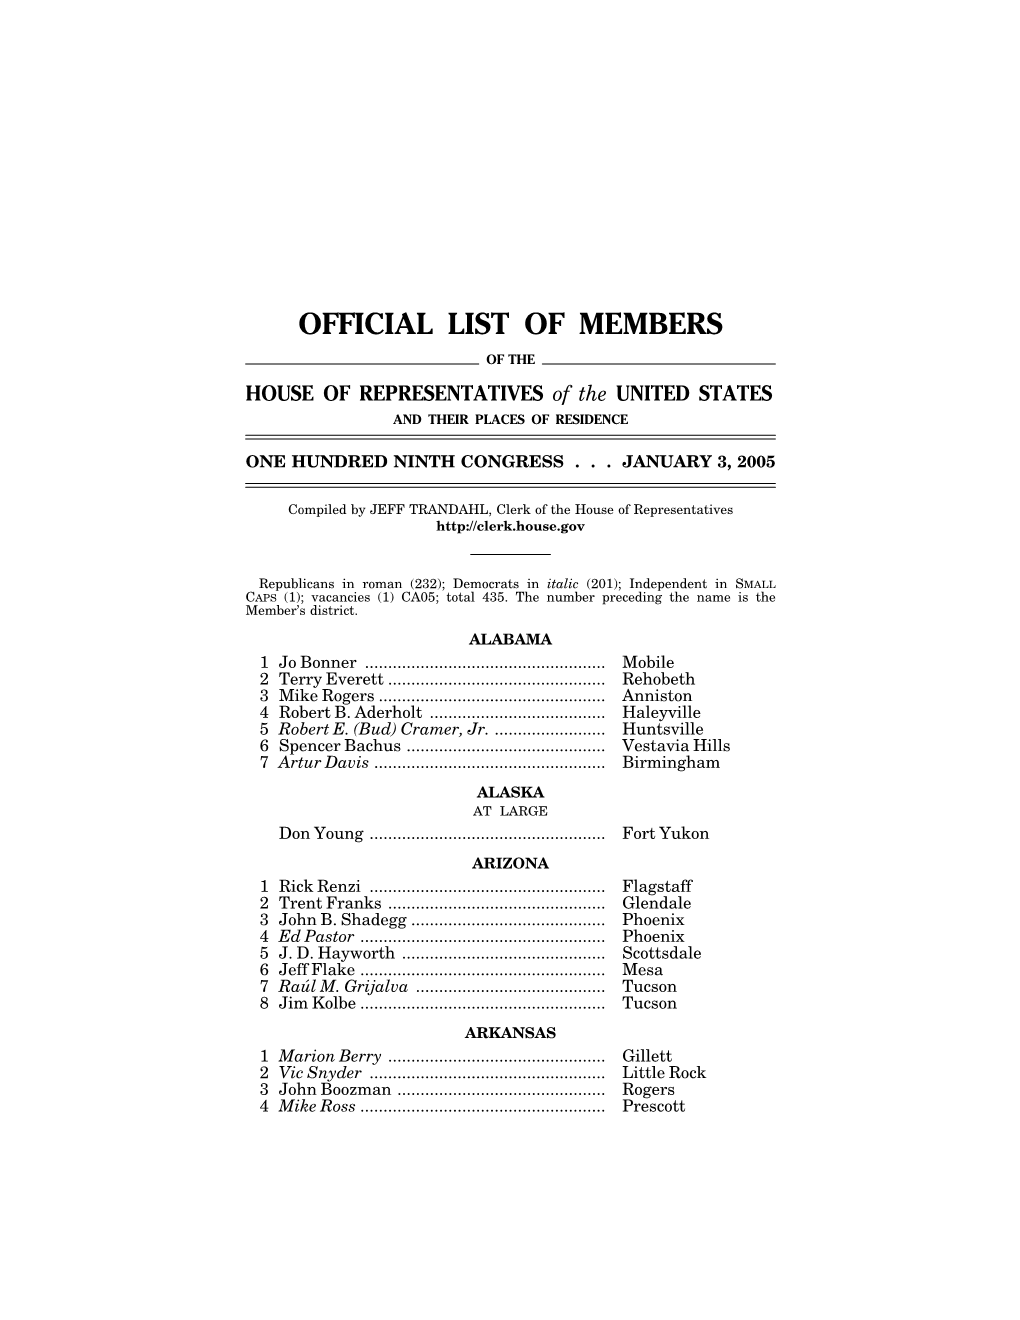 OFFICIAL LIST of MEMBERS of the HOUSE of REPRESENTATIVES of the UNITED STATES and THEIR PLACES of RESIDENCE